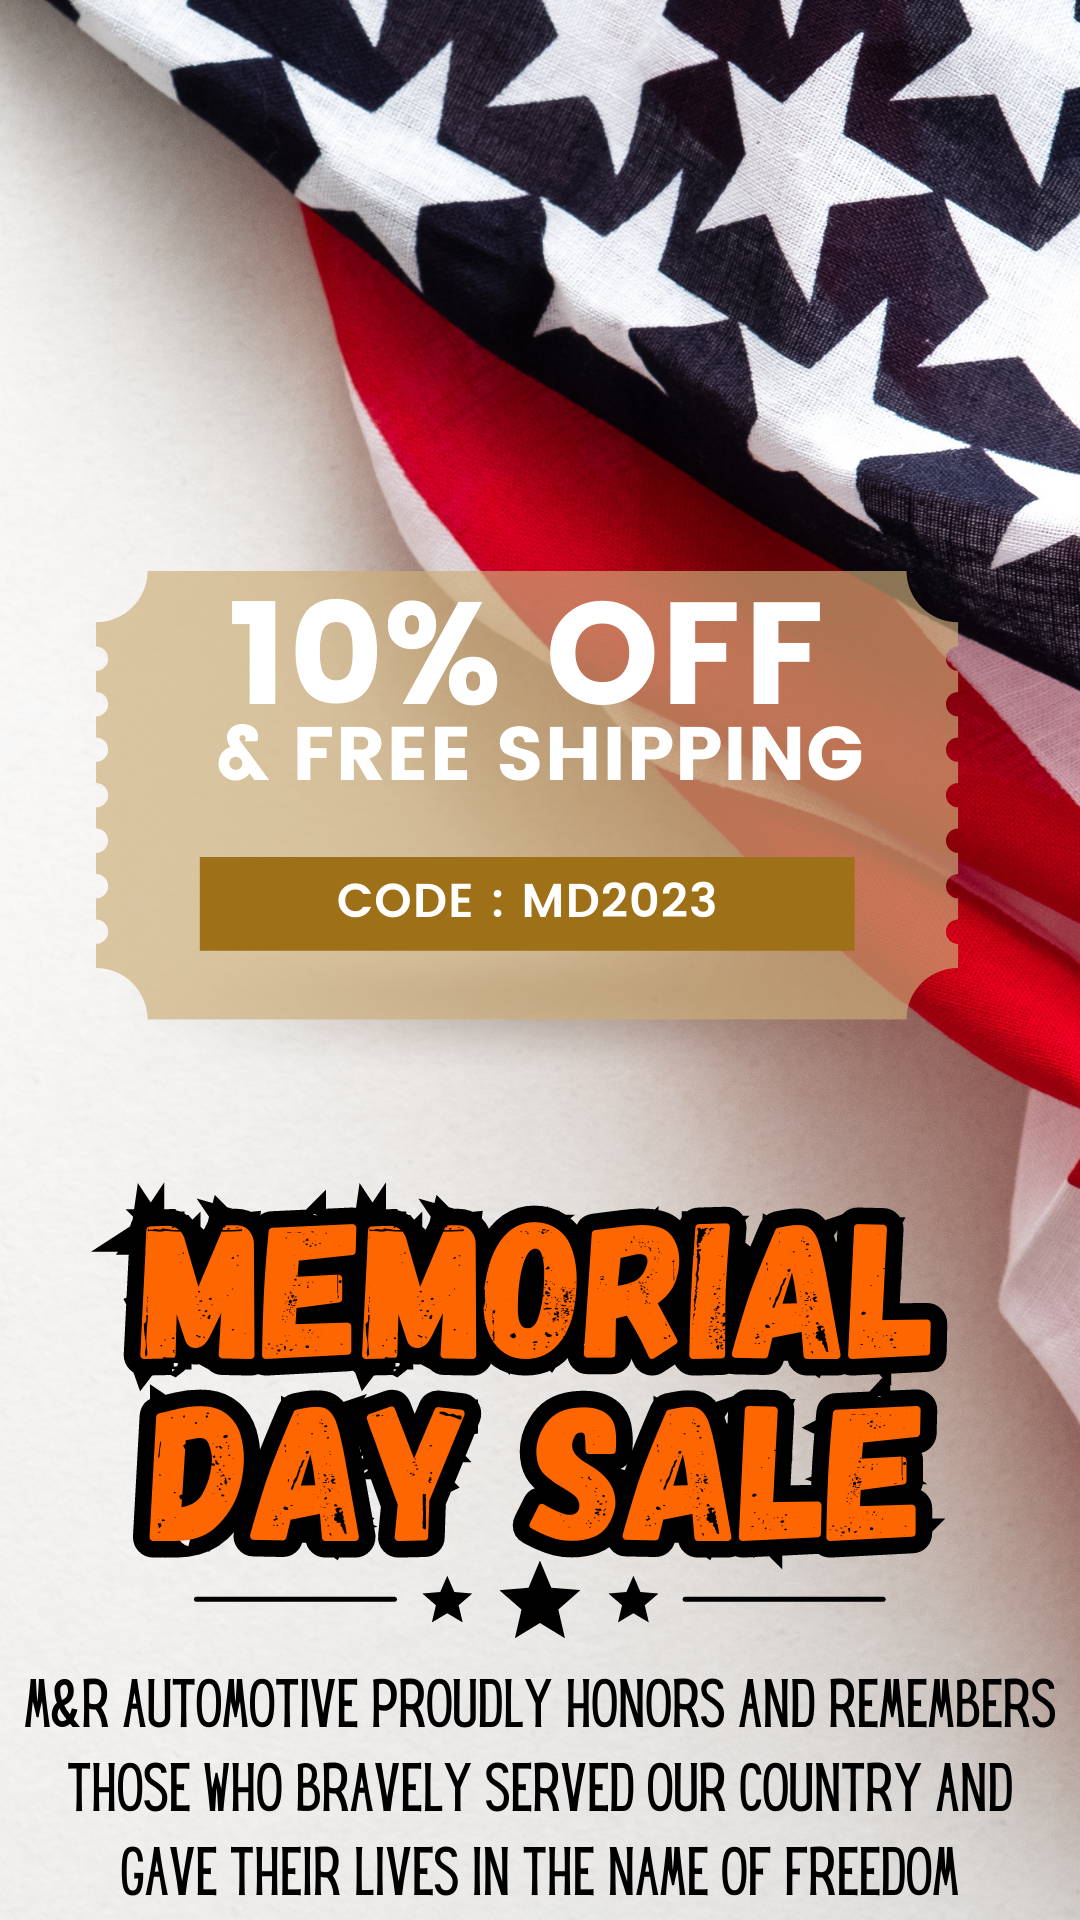 mandronline mandrautomotive memorial day sale 10% off coupon MD2023